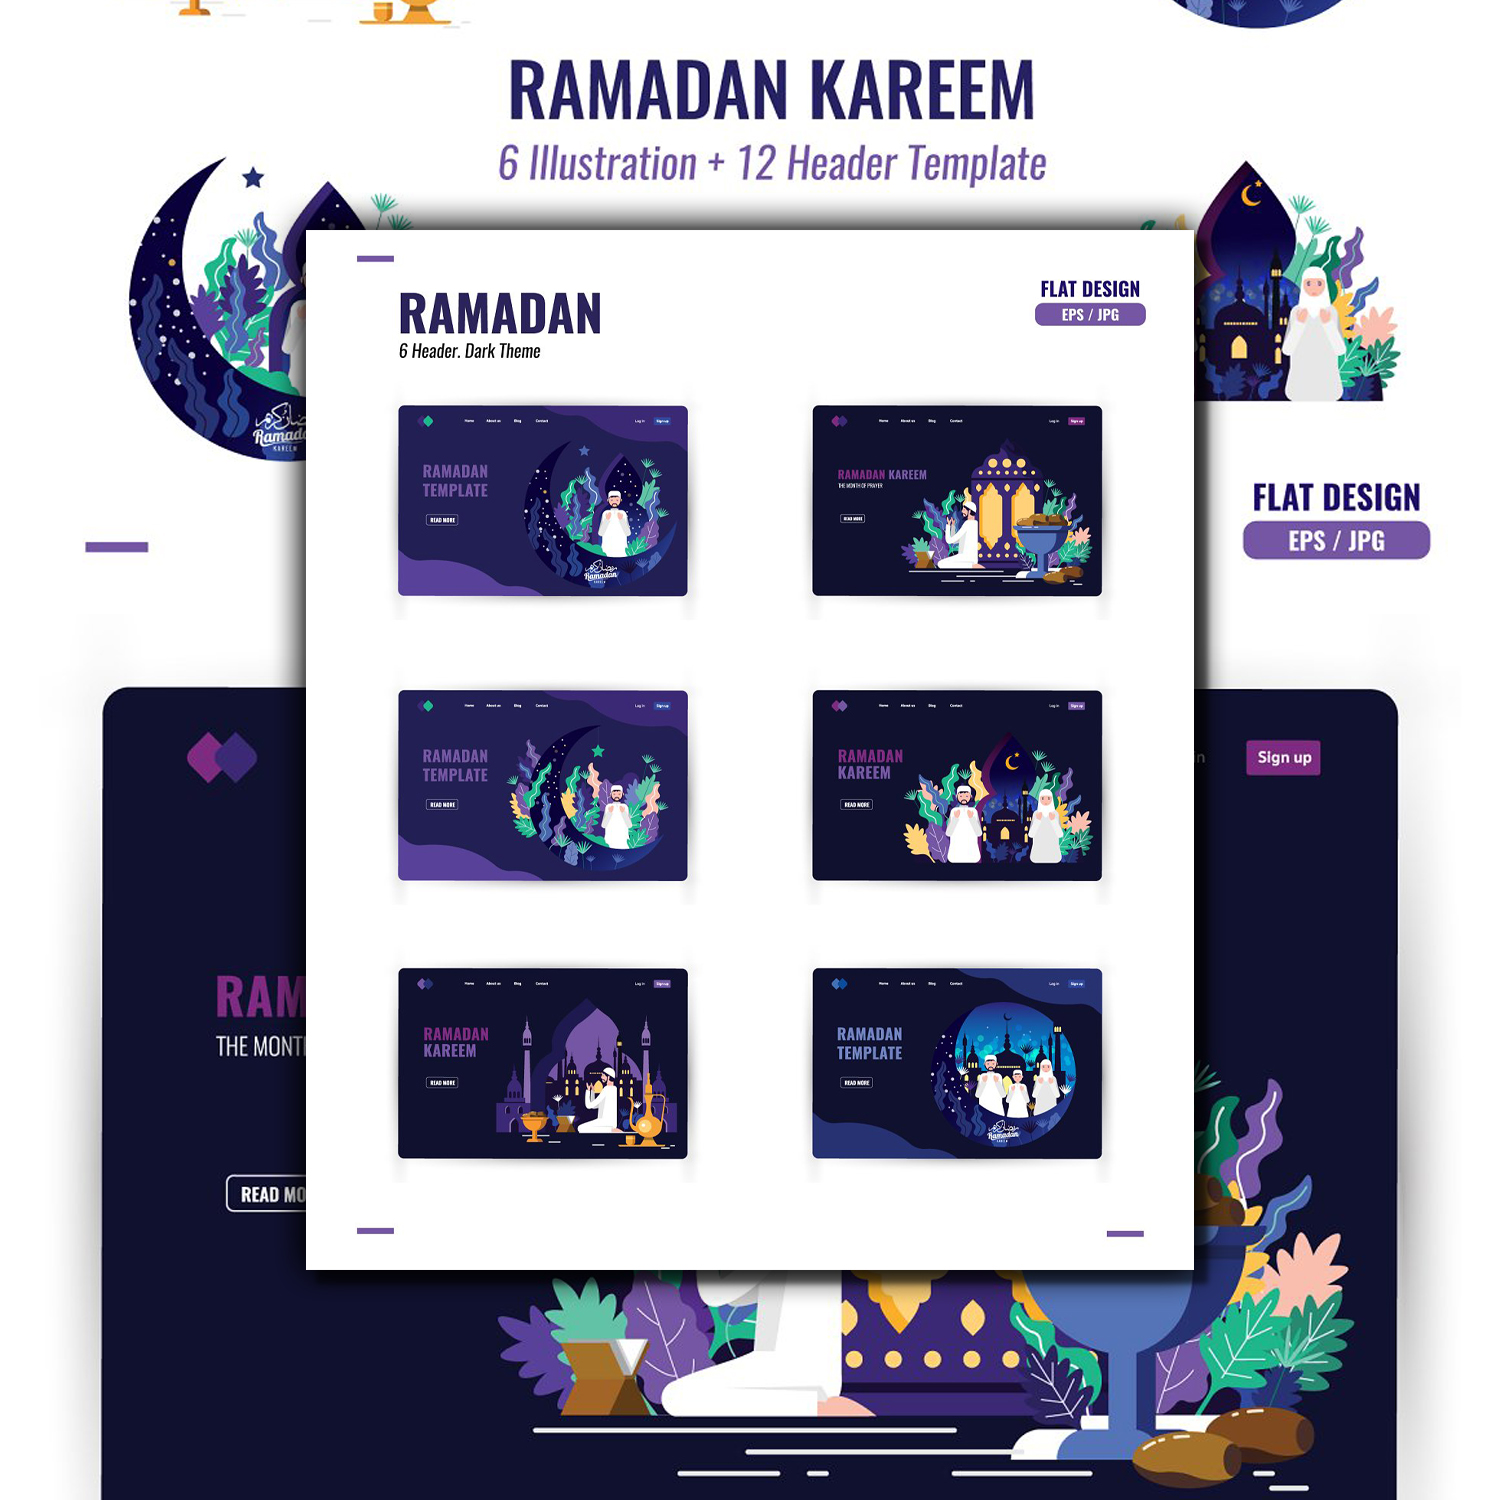 Preview ramadan illustration and web header.